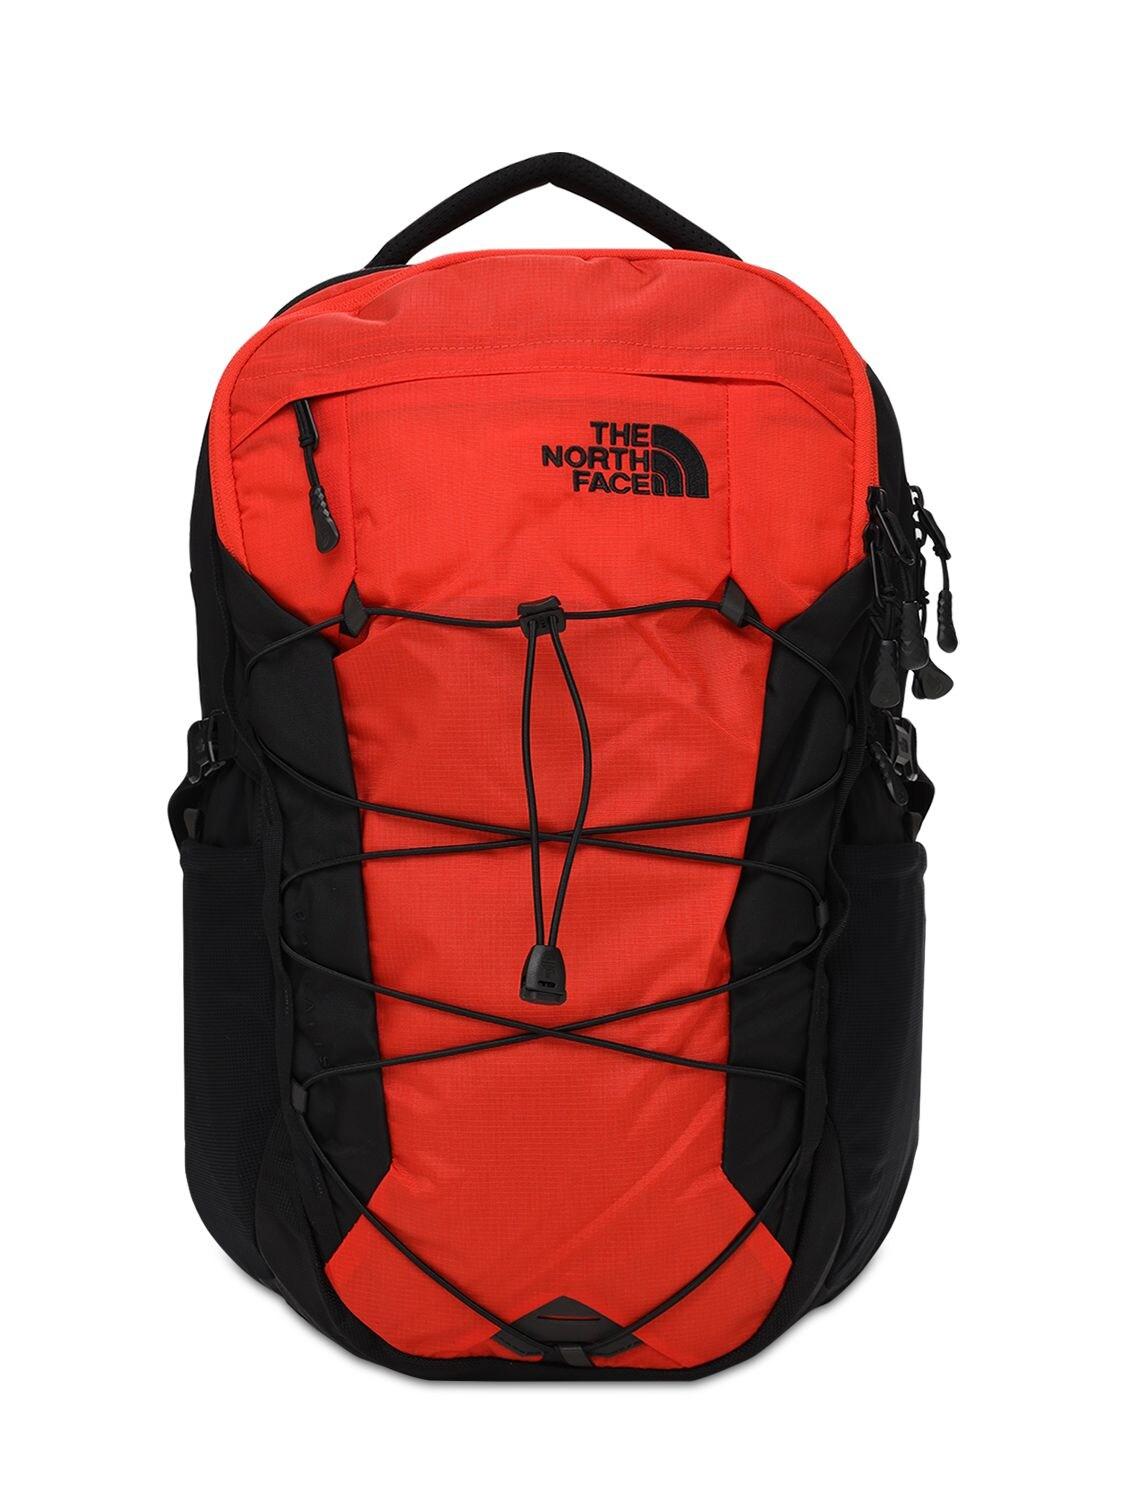 The North Face Synthetic 28l Borealis Backpack in Red/Black (Black) - Lyst